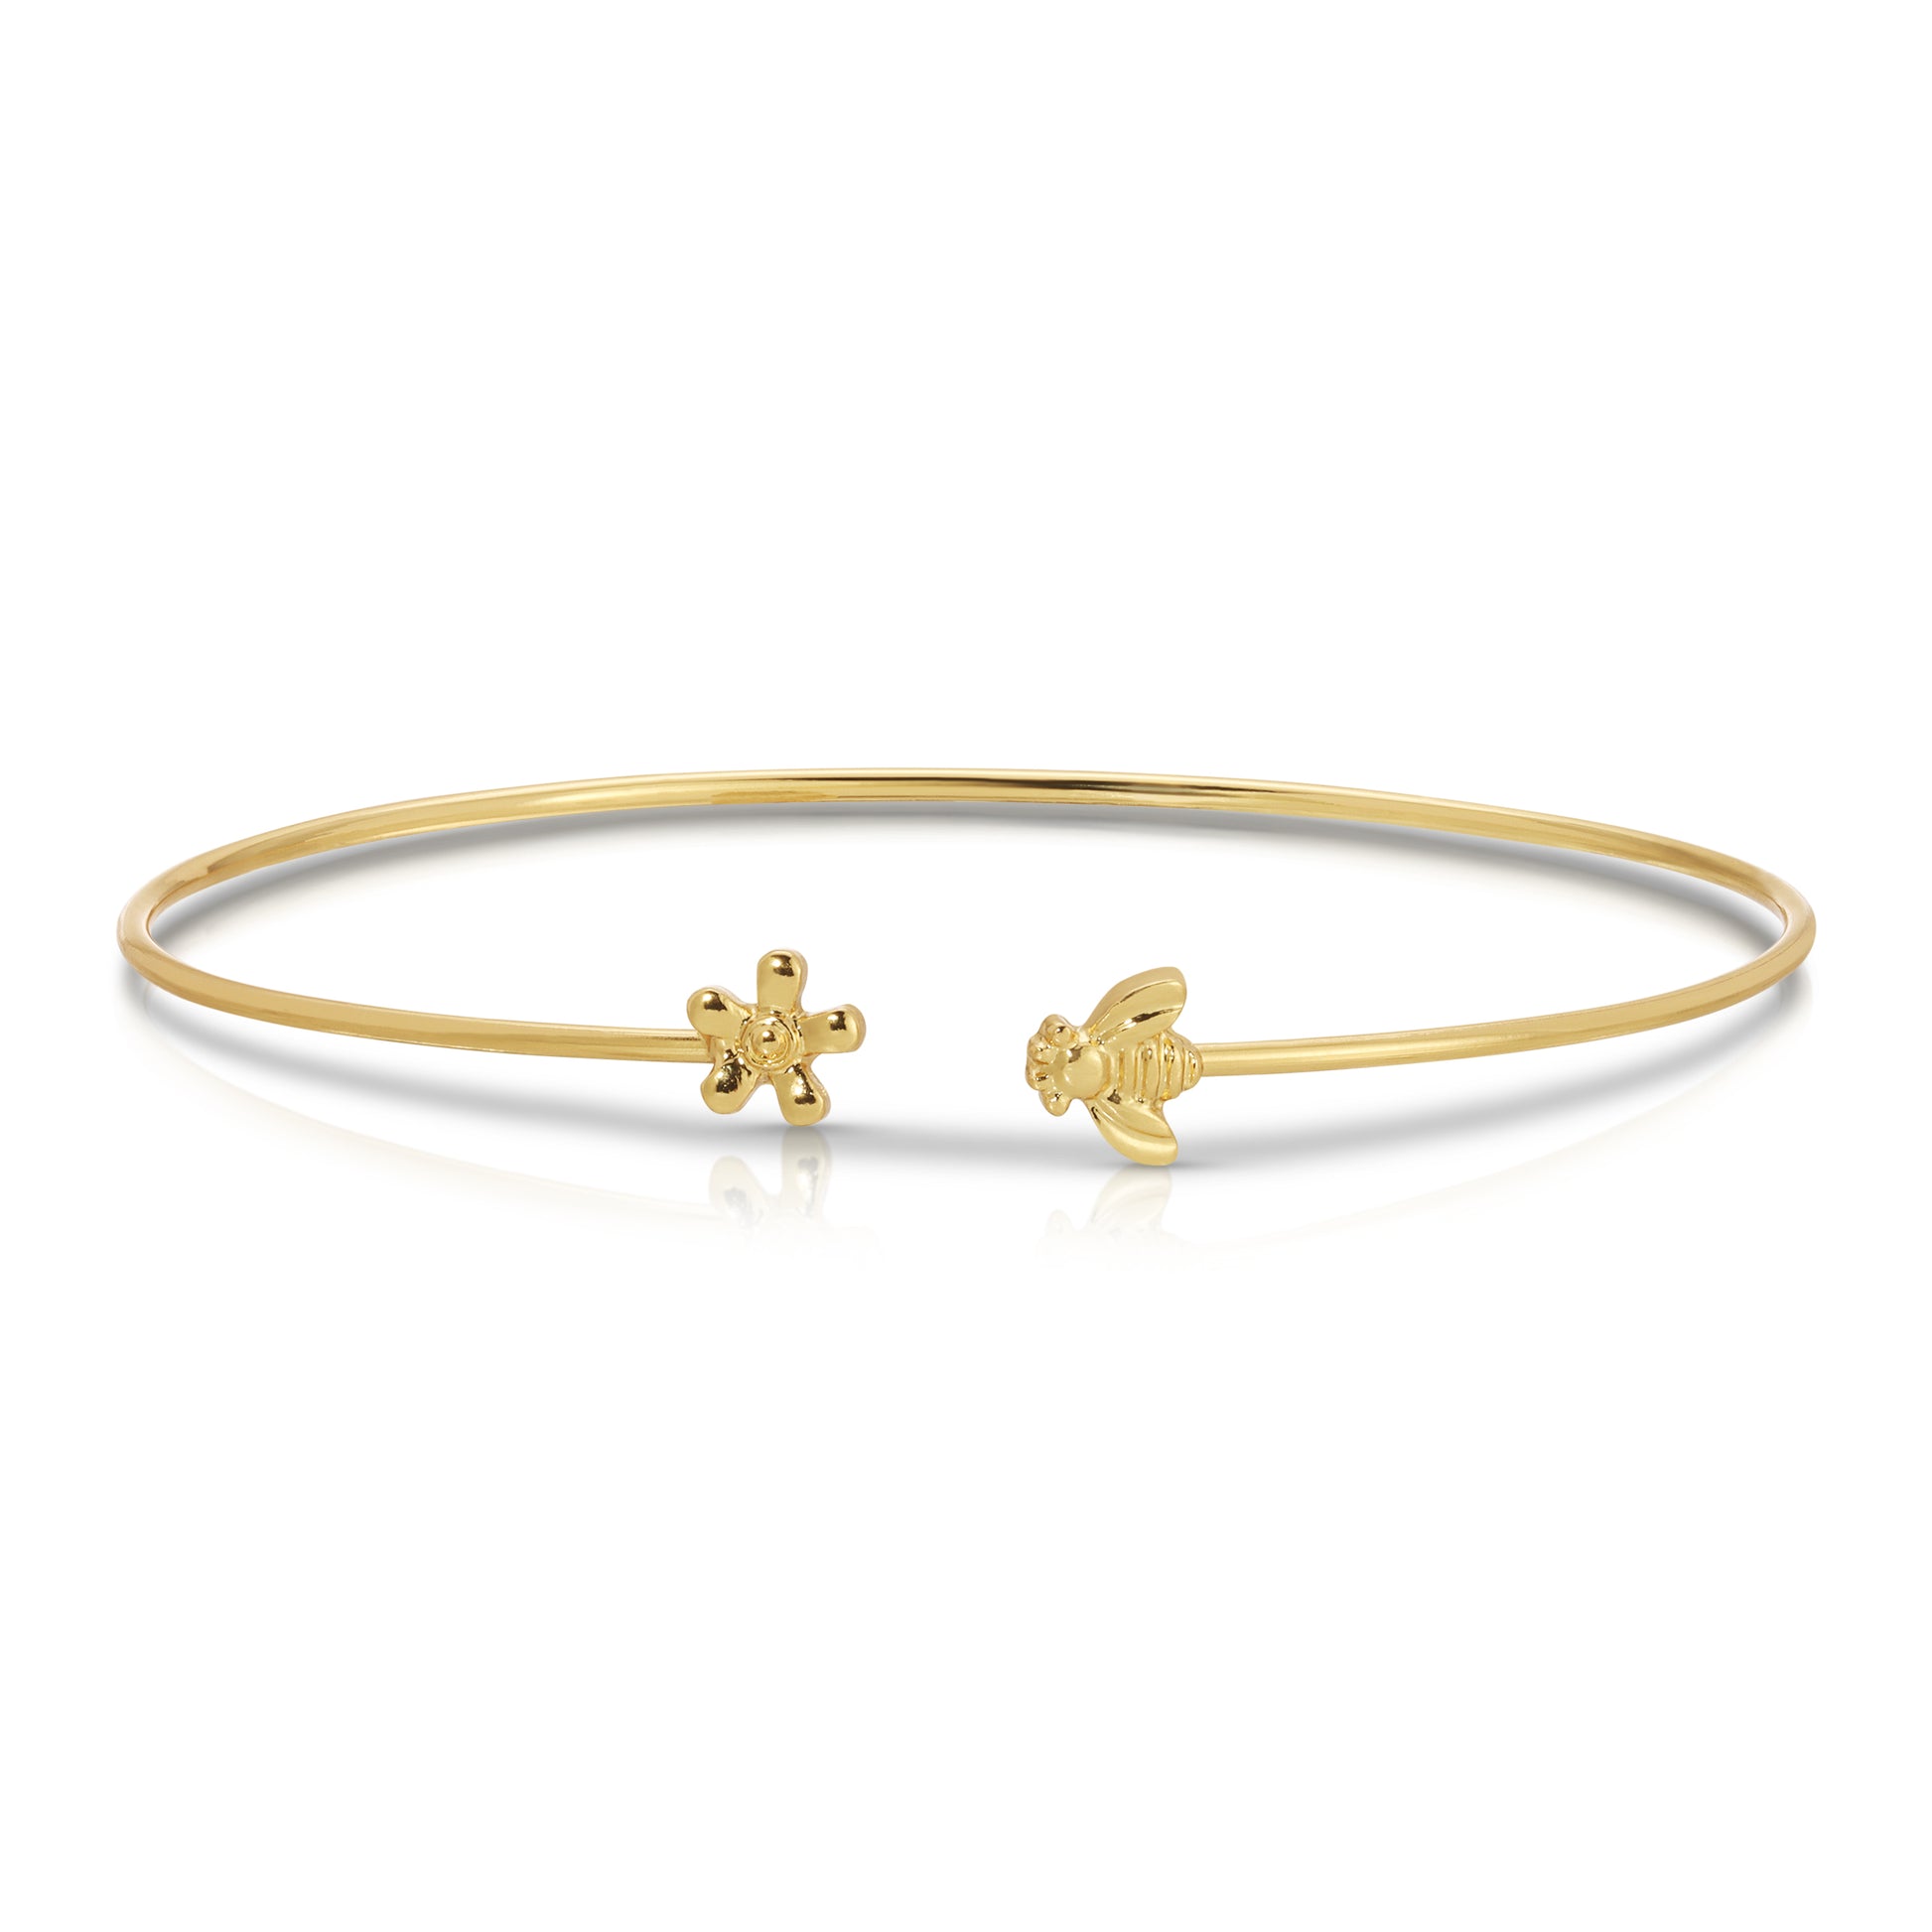 Heart Lock and Key Bracelet by Morse and Dainty